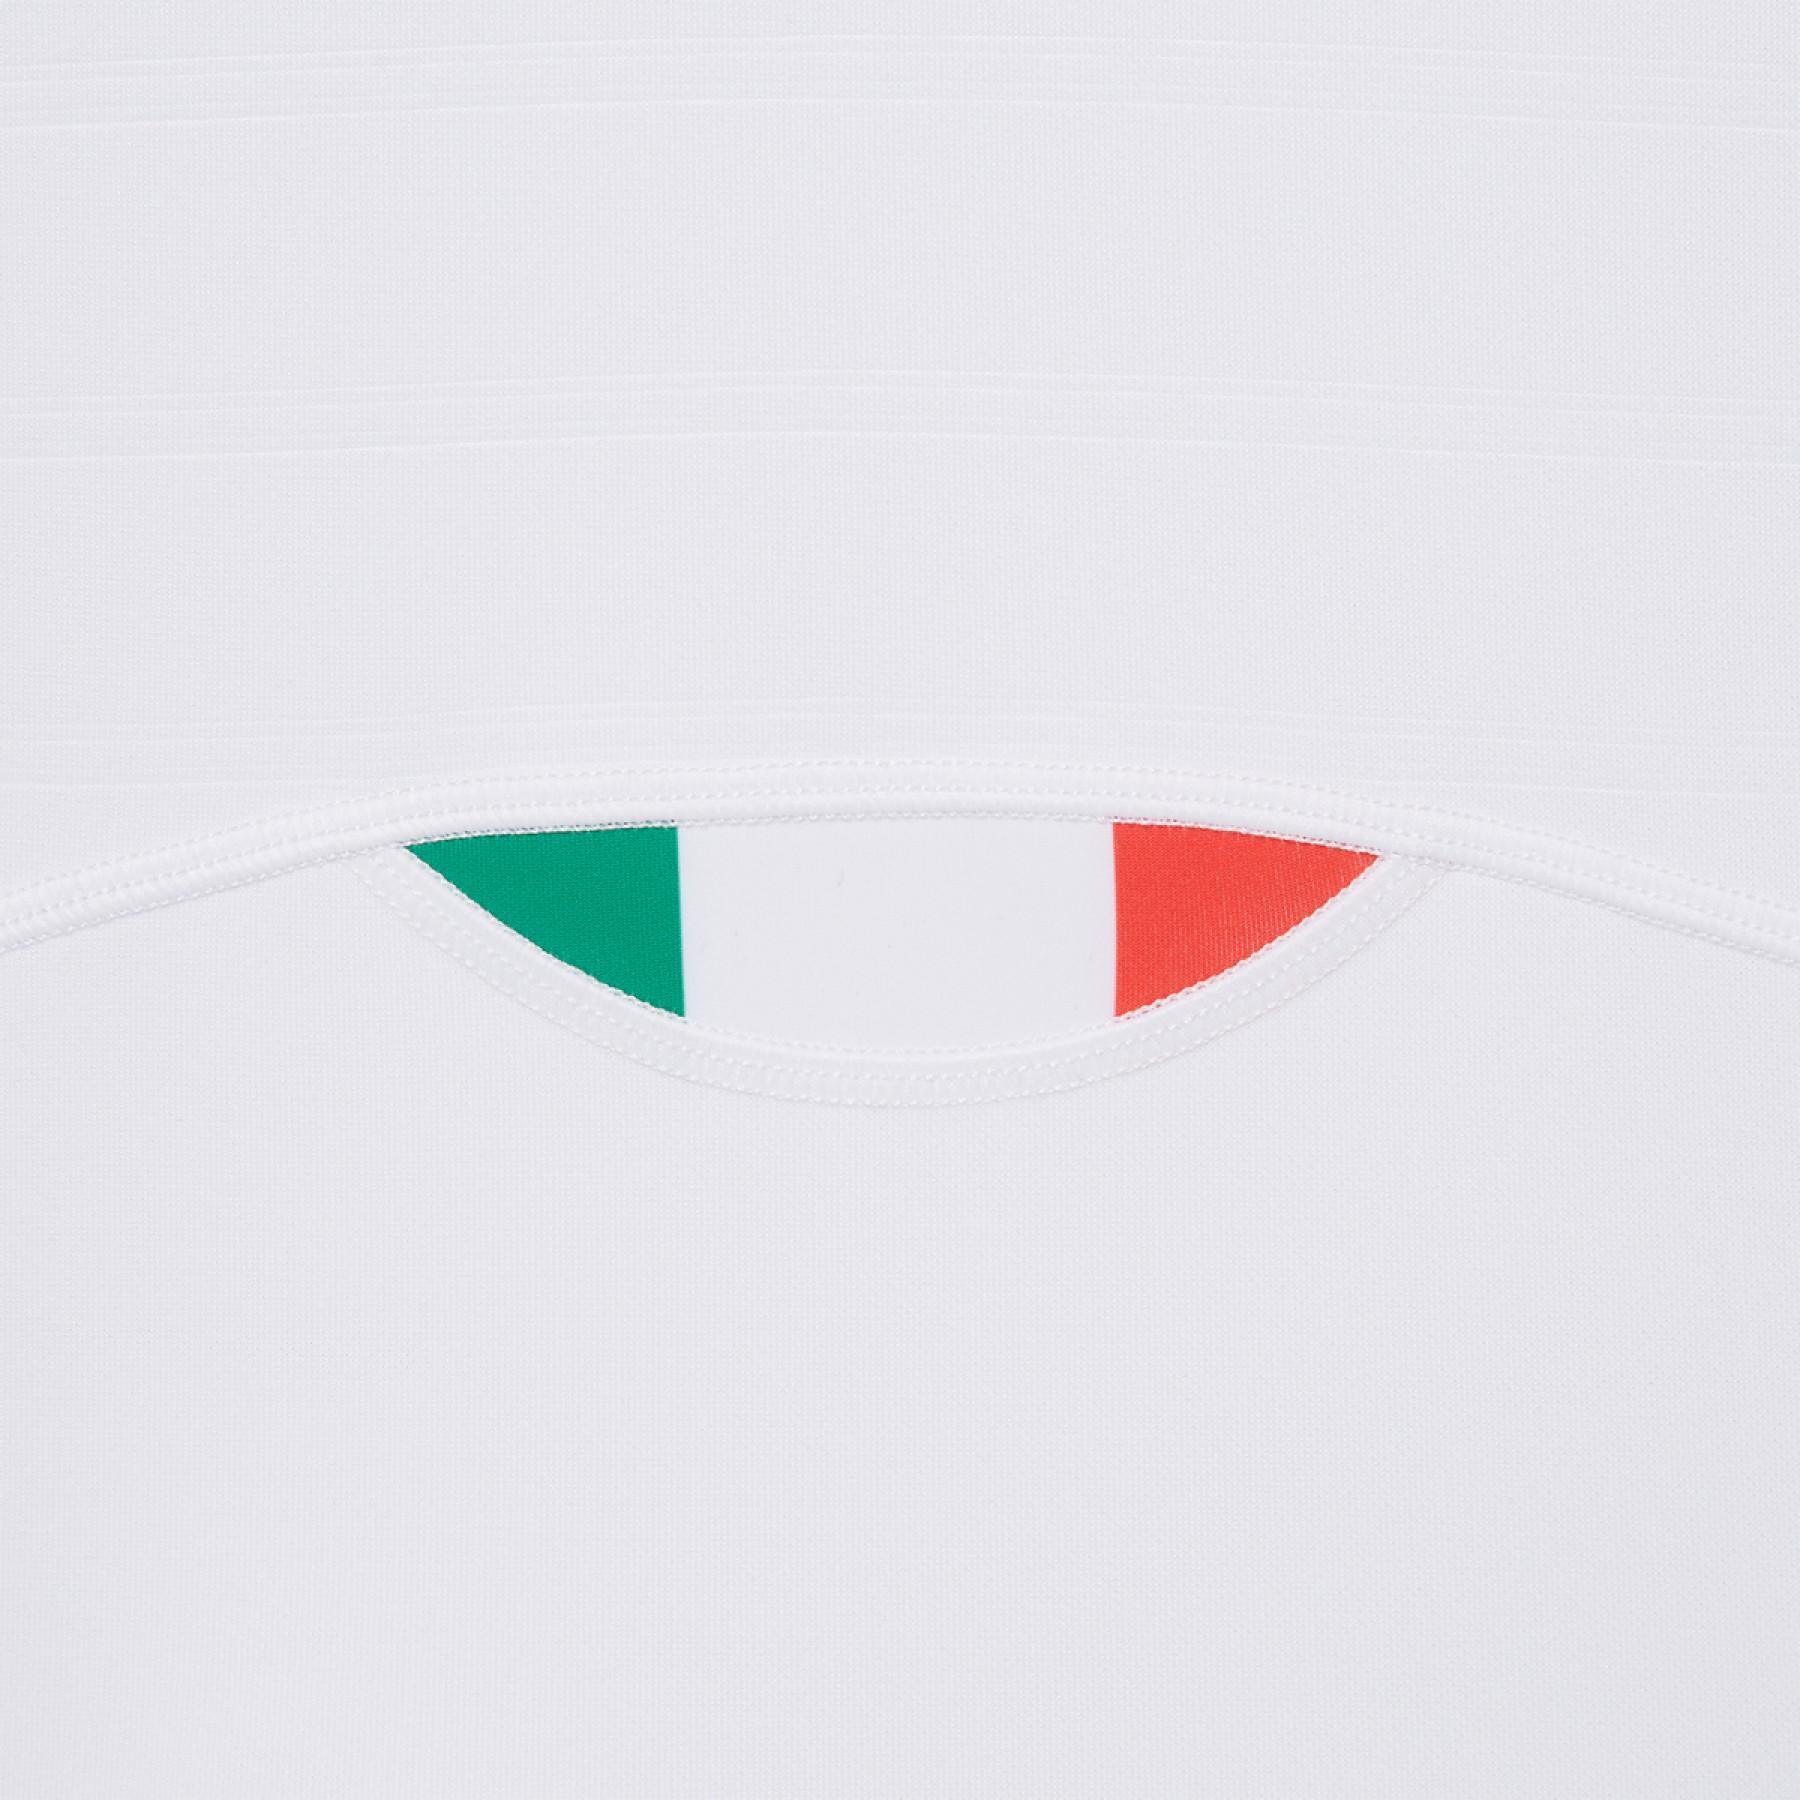 Outdoor jersey Italie rugby 2020/21